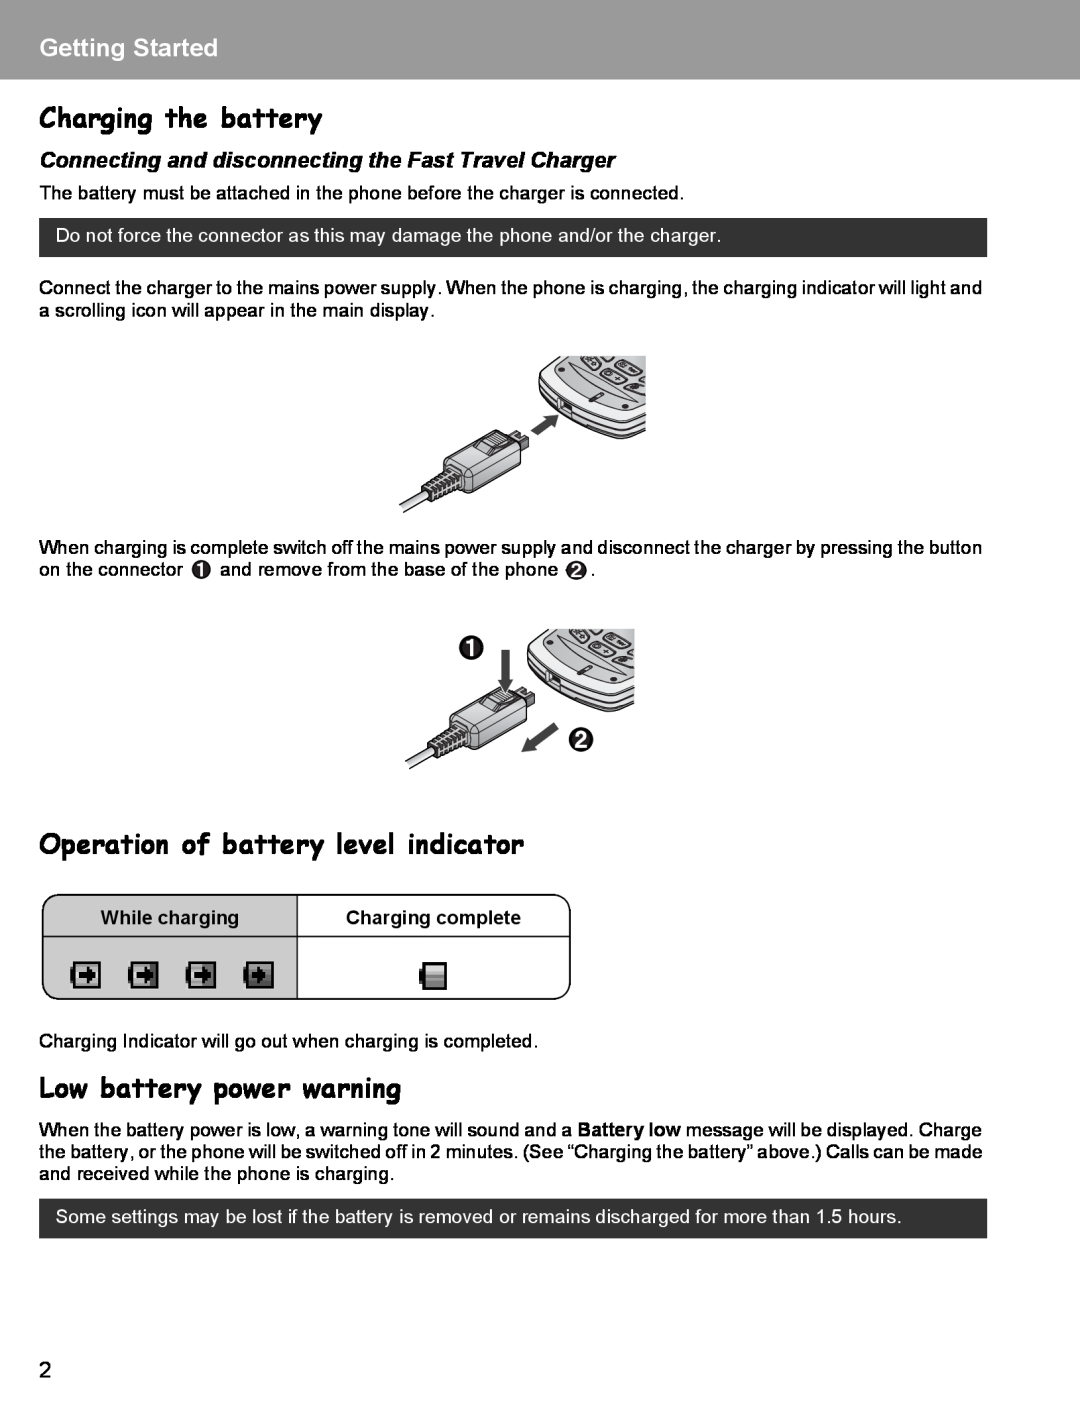 Panasonic EB-X400 Charging the battery, Operation of battery level indicator, Low battery power warning, Getting Started 